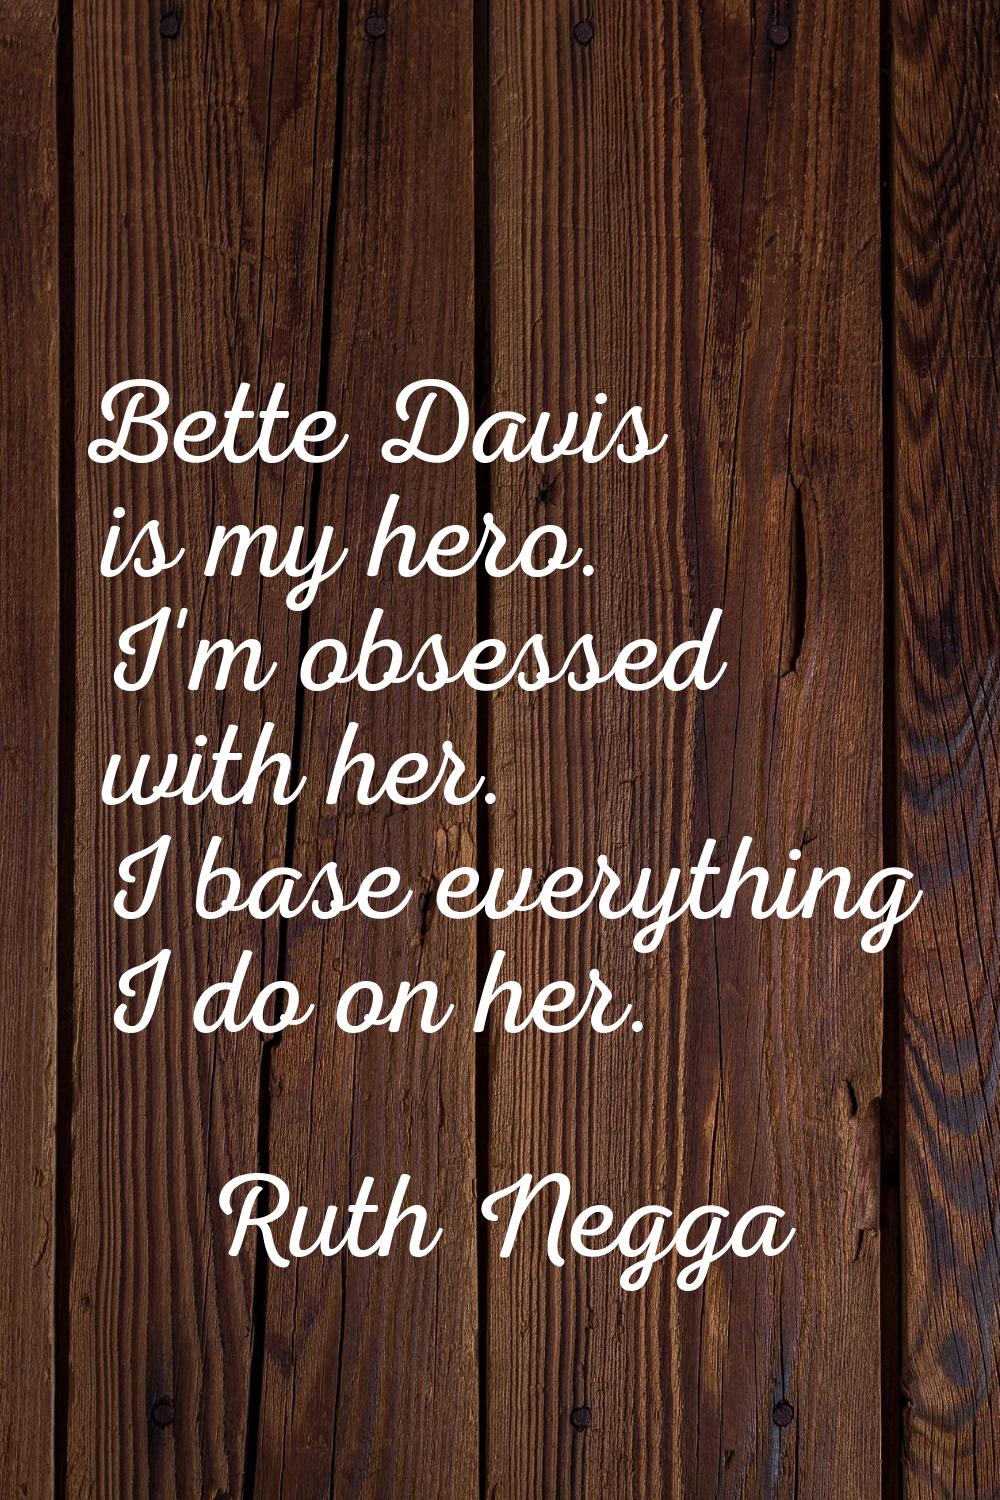 Bette Davis is my hero. I'm obsessed with her. I base everything I do on her.